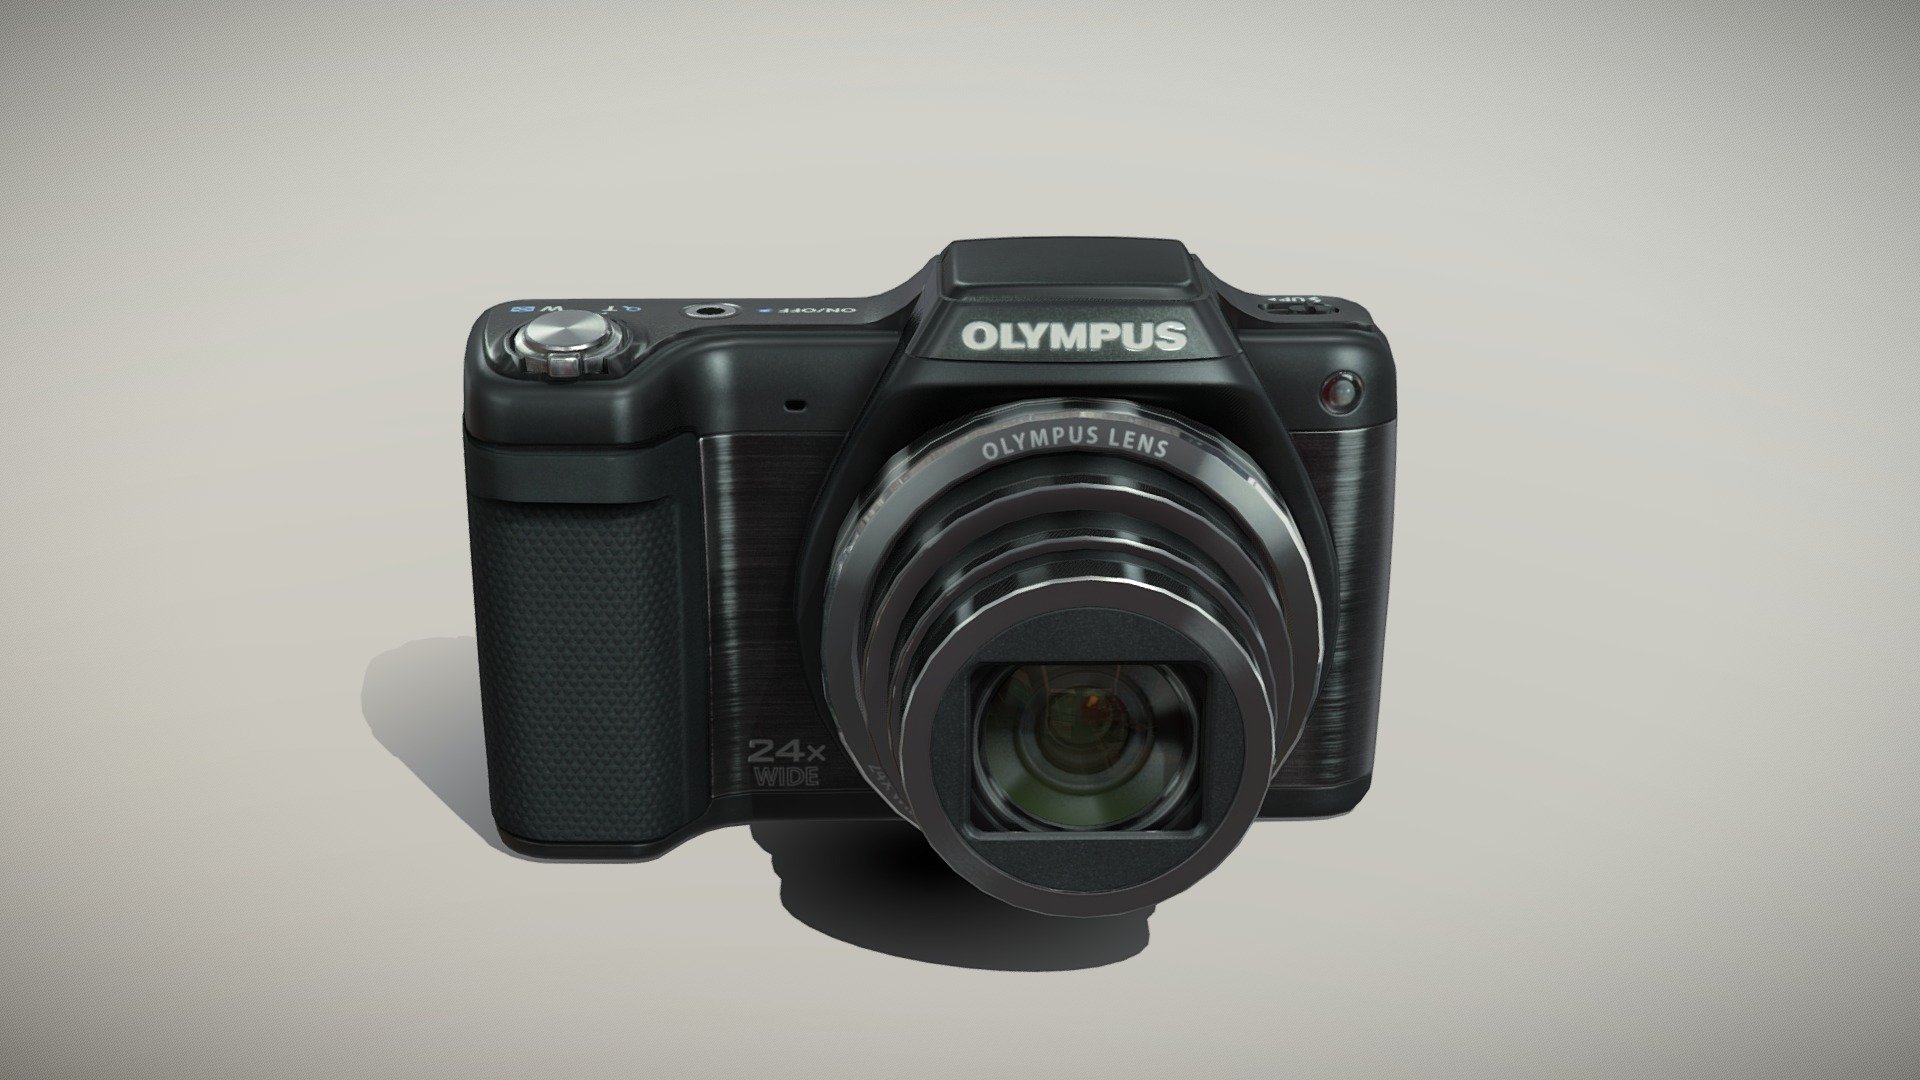 •   Let me present to you high-quality low-poly 3D model Olympus Stylus SZ15 Black. Modeling was made with ortho-photos of real camera that is why all details of design are recreated most authentically.

•    This model consists of a few meshes, it is low-polygonal and it has only two materials (Body and Glass of Lens).

•   The total of the main textures is 5. Resolution of all textures is 4096 pixels square aspect ratio in .png format. Also there is original texture file .PSD format in separate archive.

•   Polygon count of the model is – 5365.

•   The model has correct dimensions in real-world scale. All parts grouped and named correctly.

•   To use the model in other 3D programs there are scenes saved in formats .fbx, .obj, .DAE, .max (2010 version).

Note: If you see some artifacts on the textures, it means compression works in the Viewer. We recommend setting HD quality for textures. But anyway, original textures have no artifacts 3d model